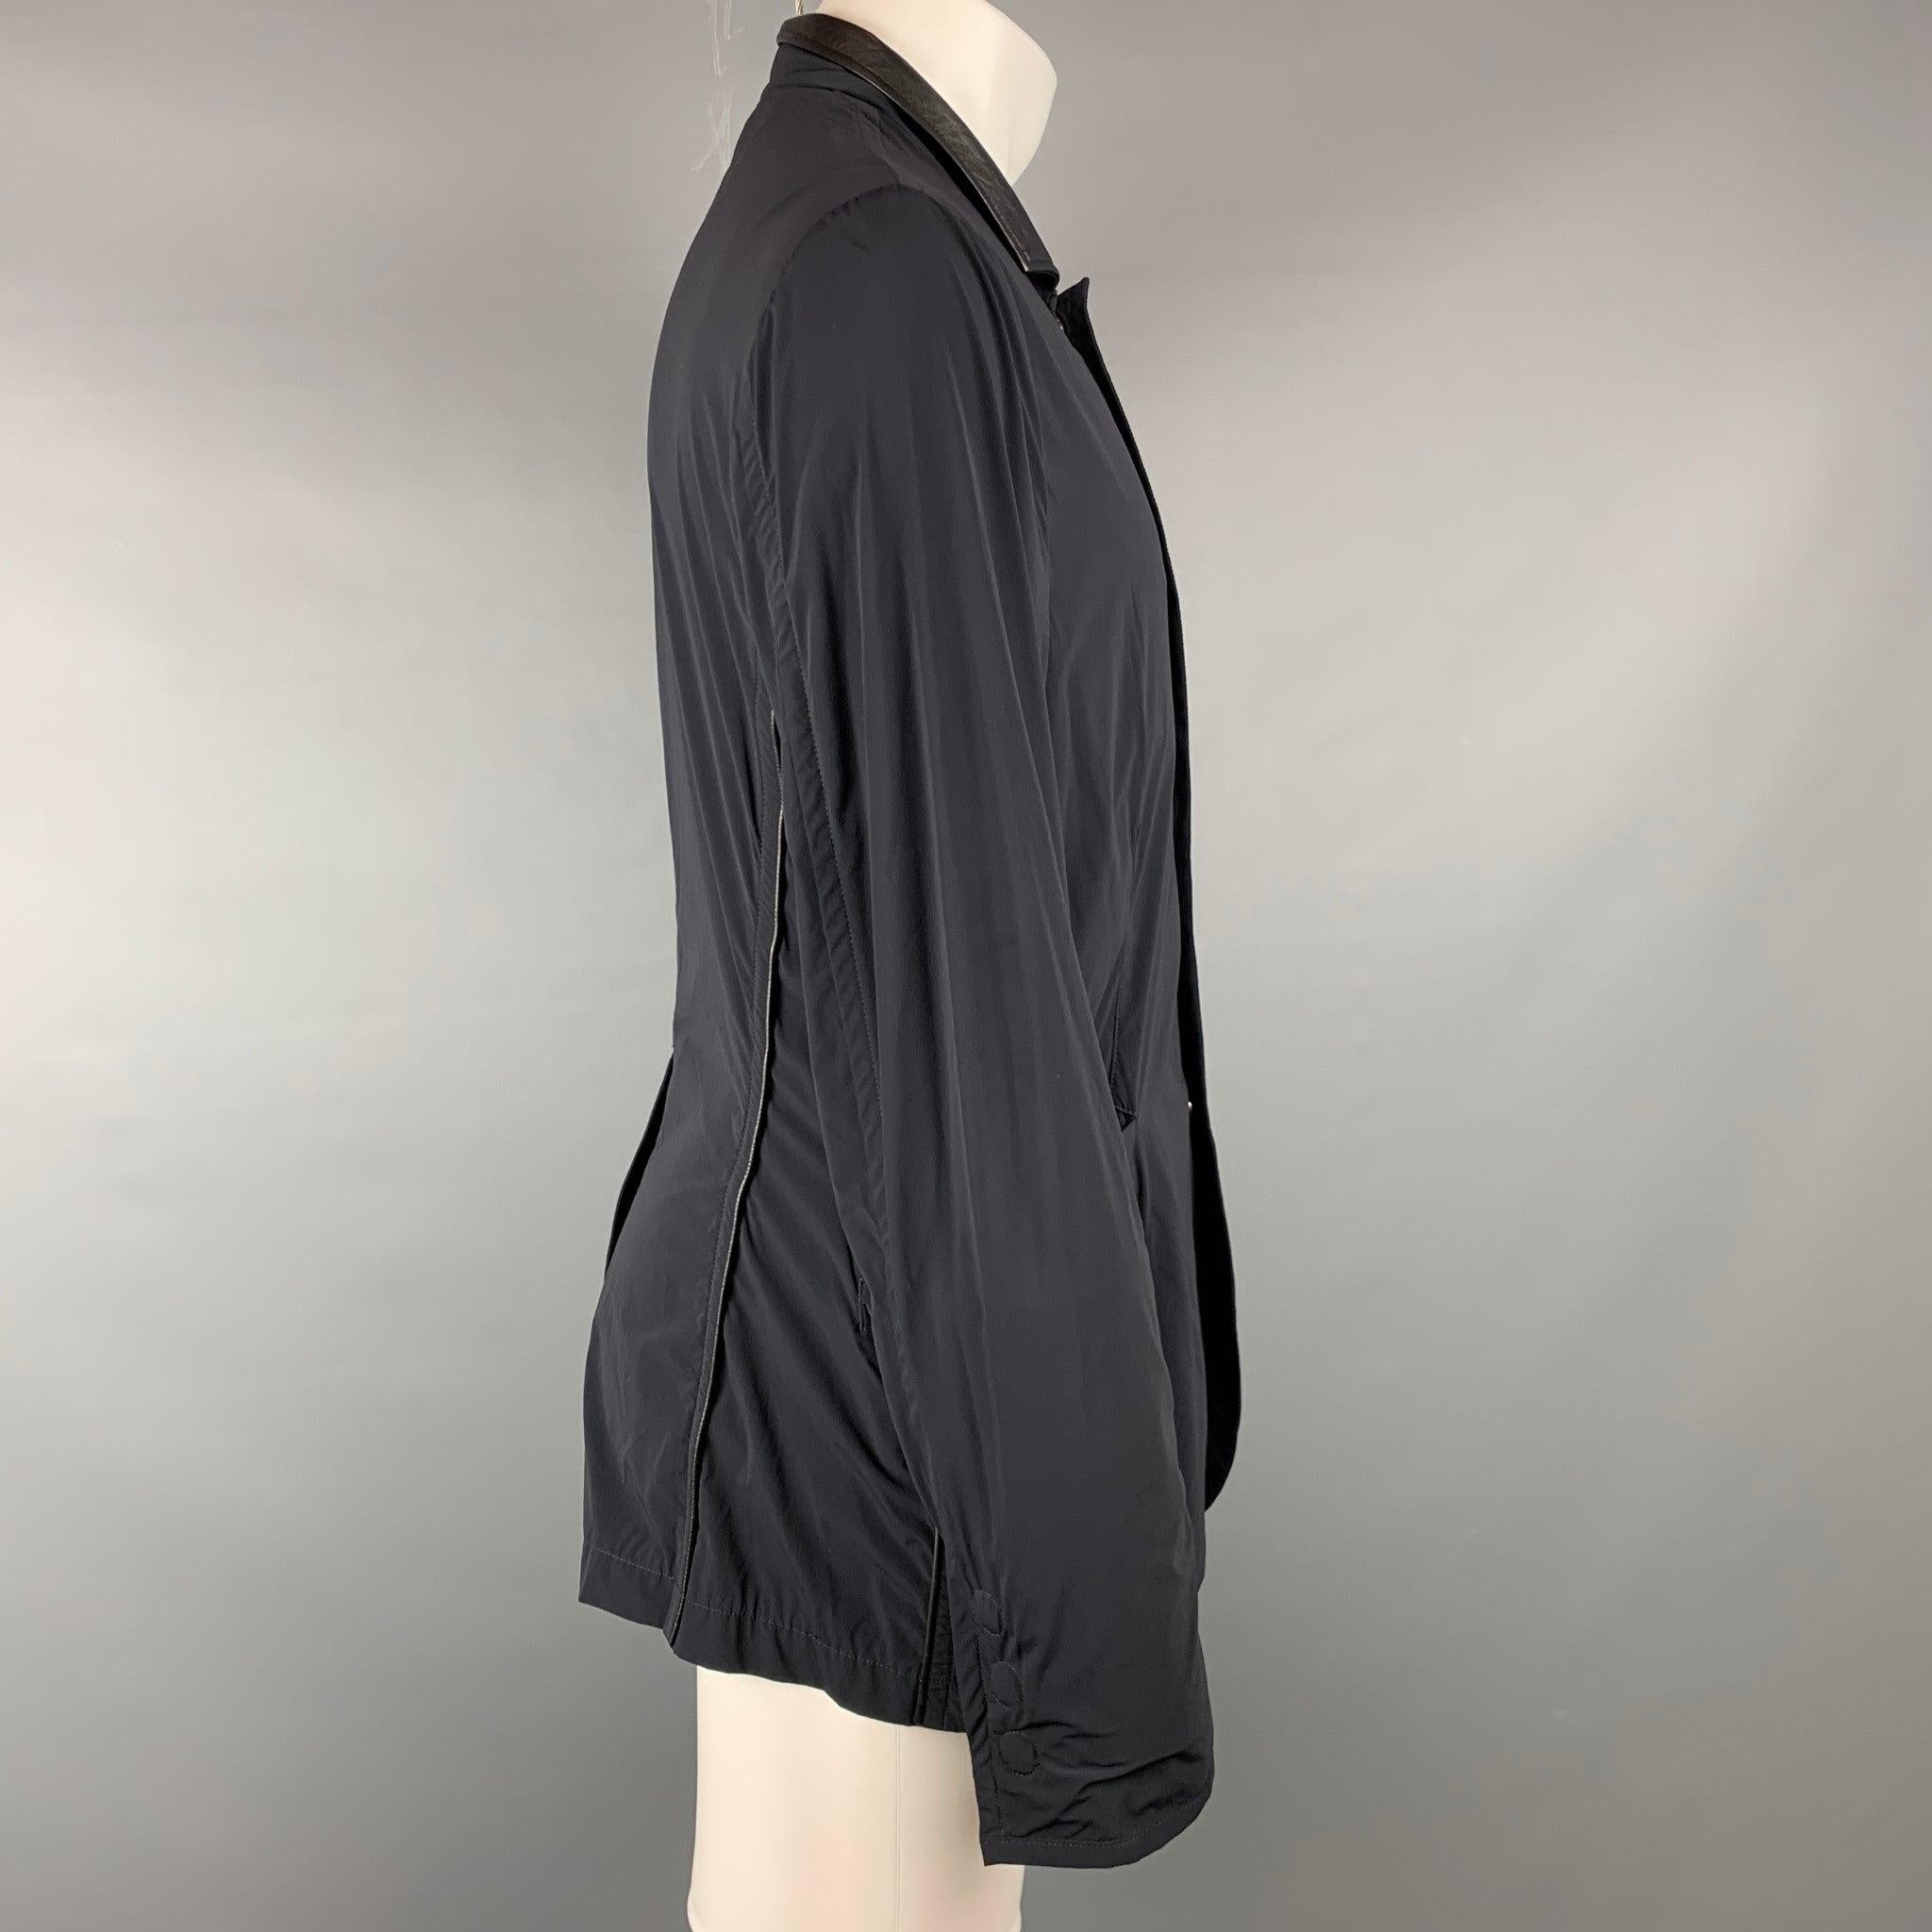 GIORGIO ARMANI Size 42 Navy Nylon Blend Snaps Lightweight Jacket In Good Condition For Sale In San Francisco, CA